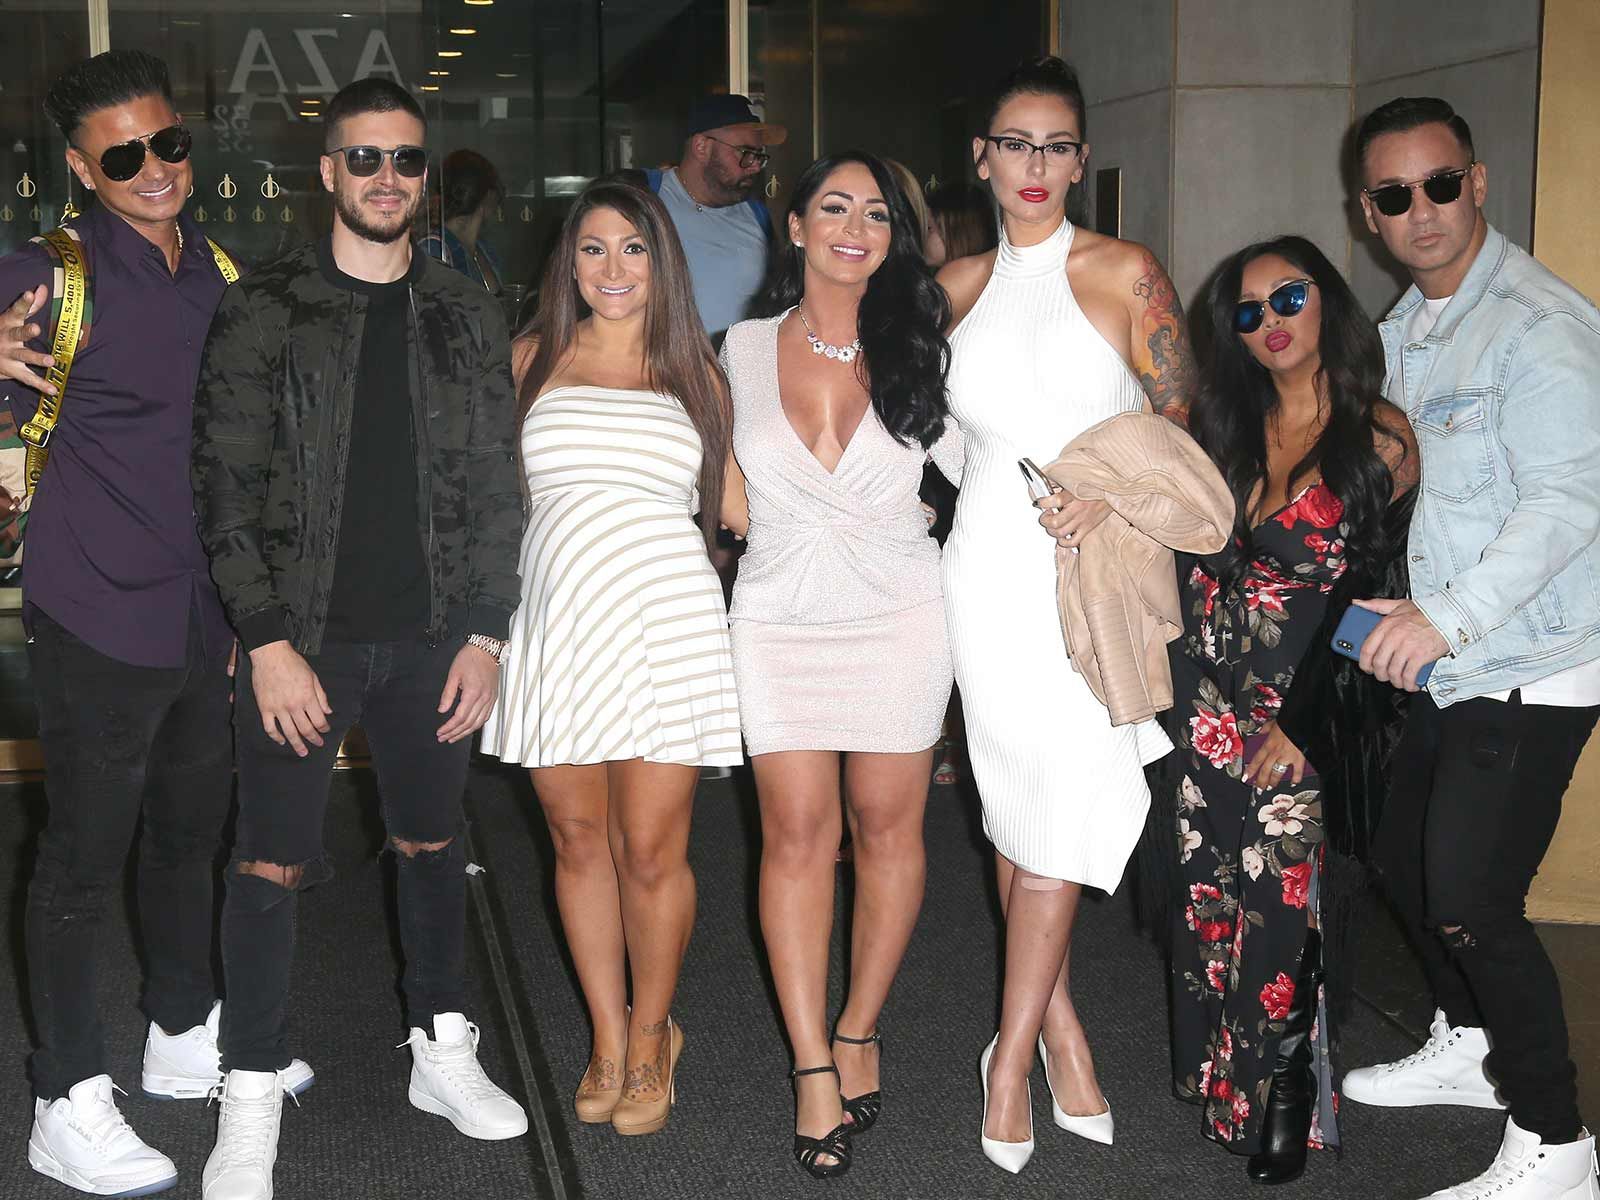 Angelina Joins 'Jersey Shore' Cast on Press Tour Ahead of 'Family